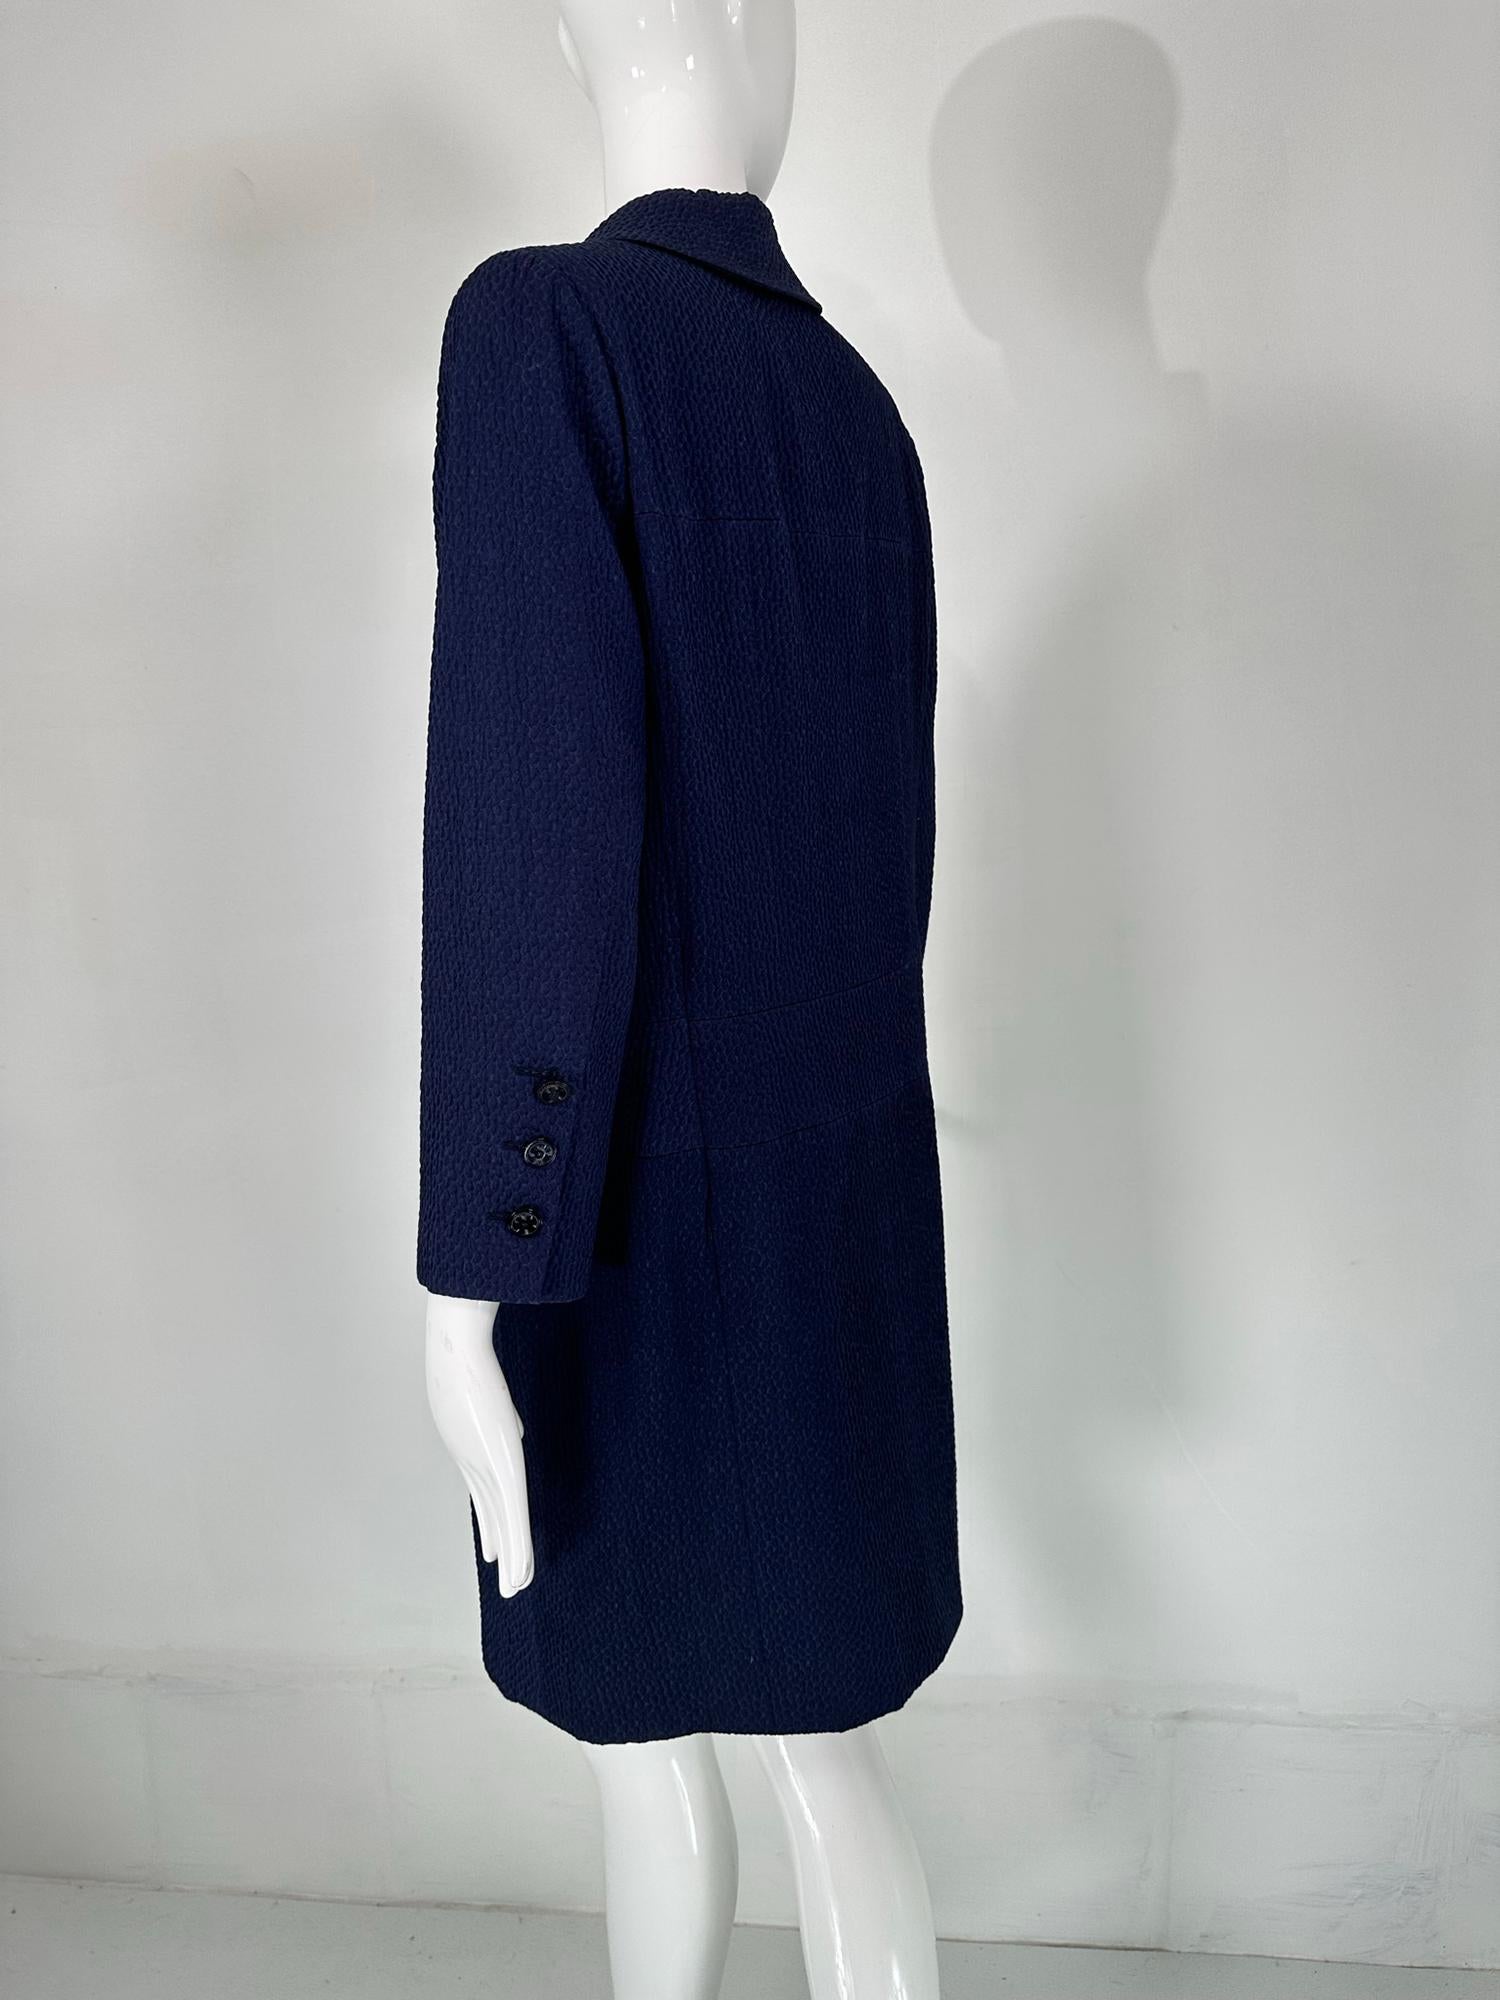 Chanel Navy Blue Single Breasted 4 Pocket Cloque Cotton Coat  For Sale 1